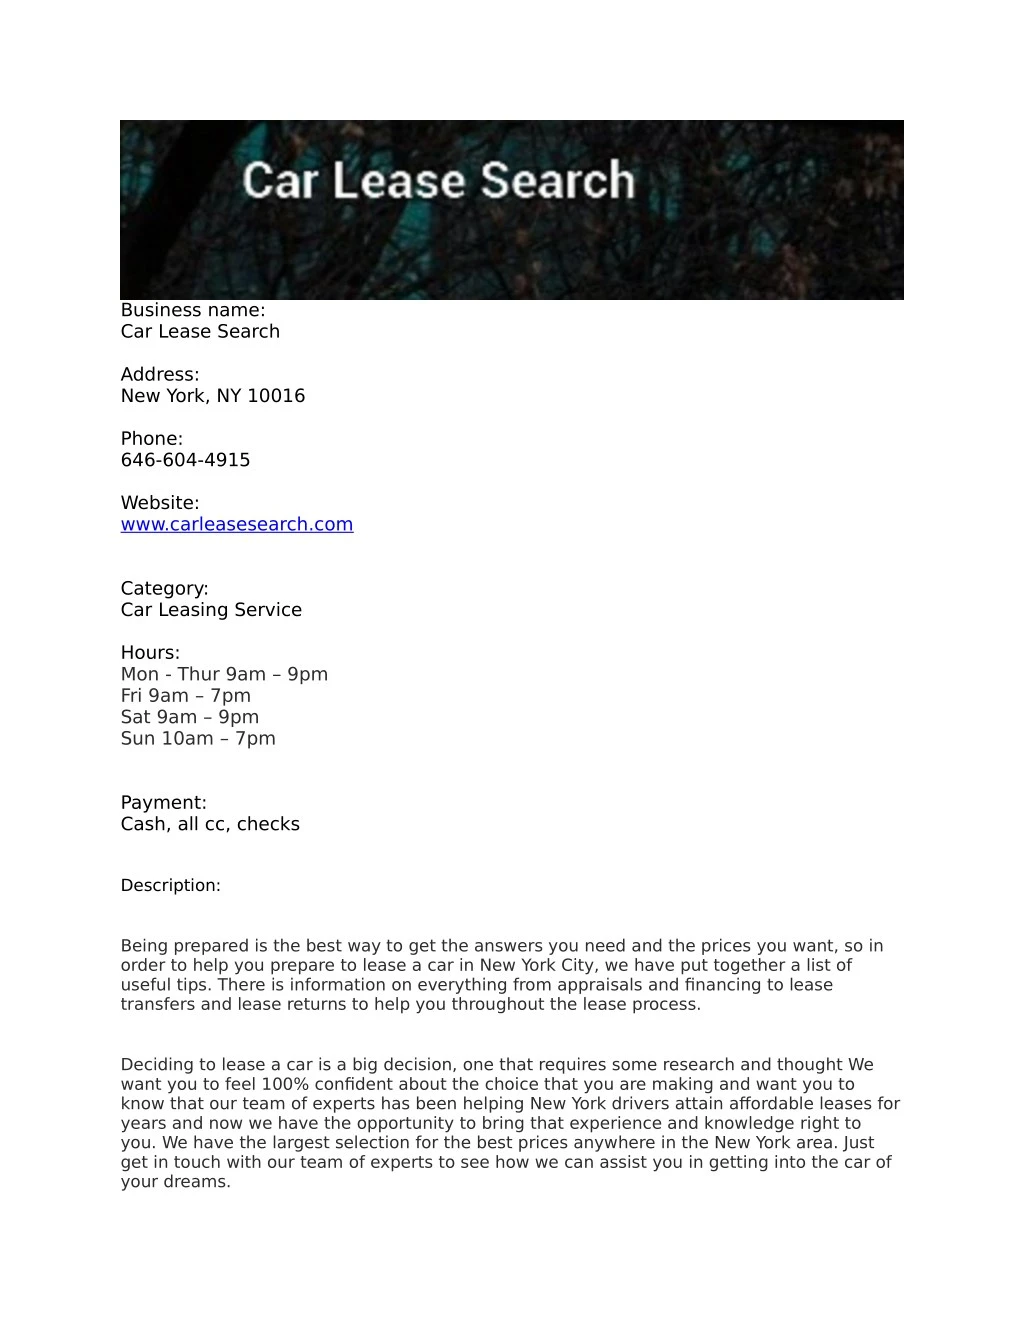 business name car lease search